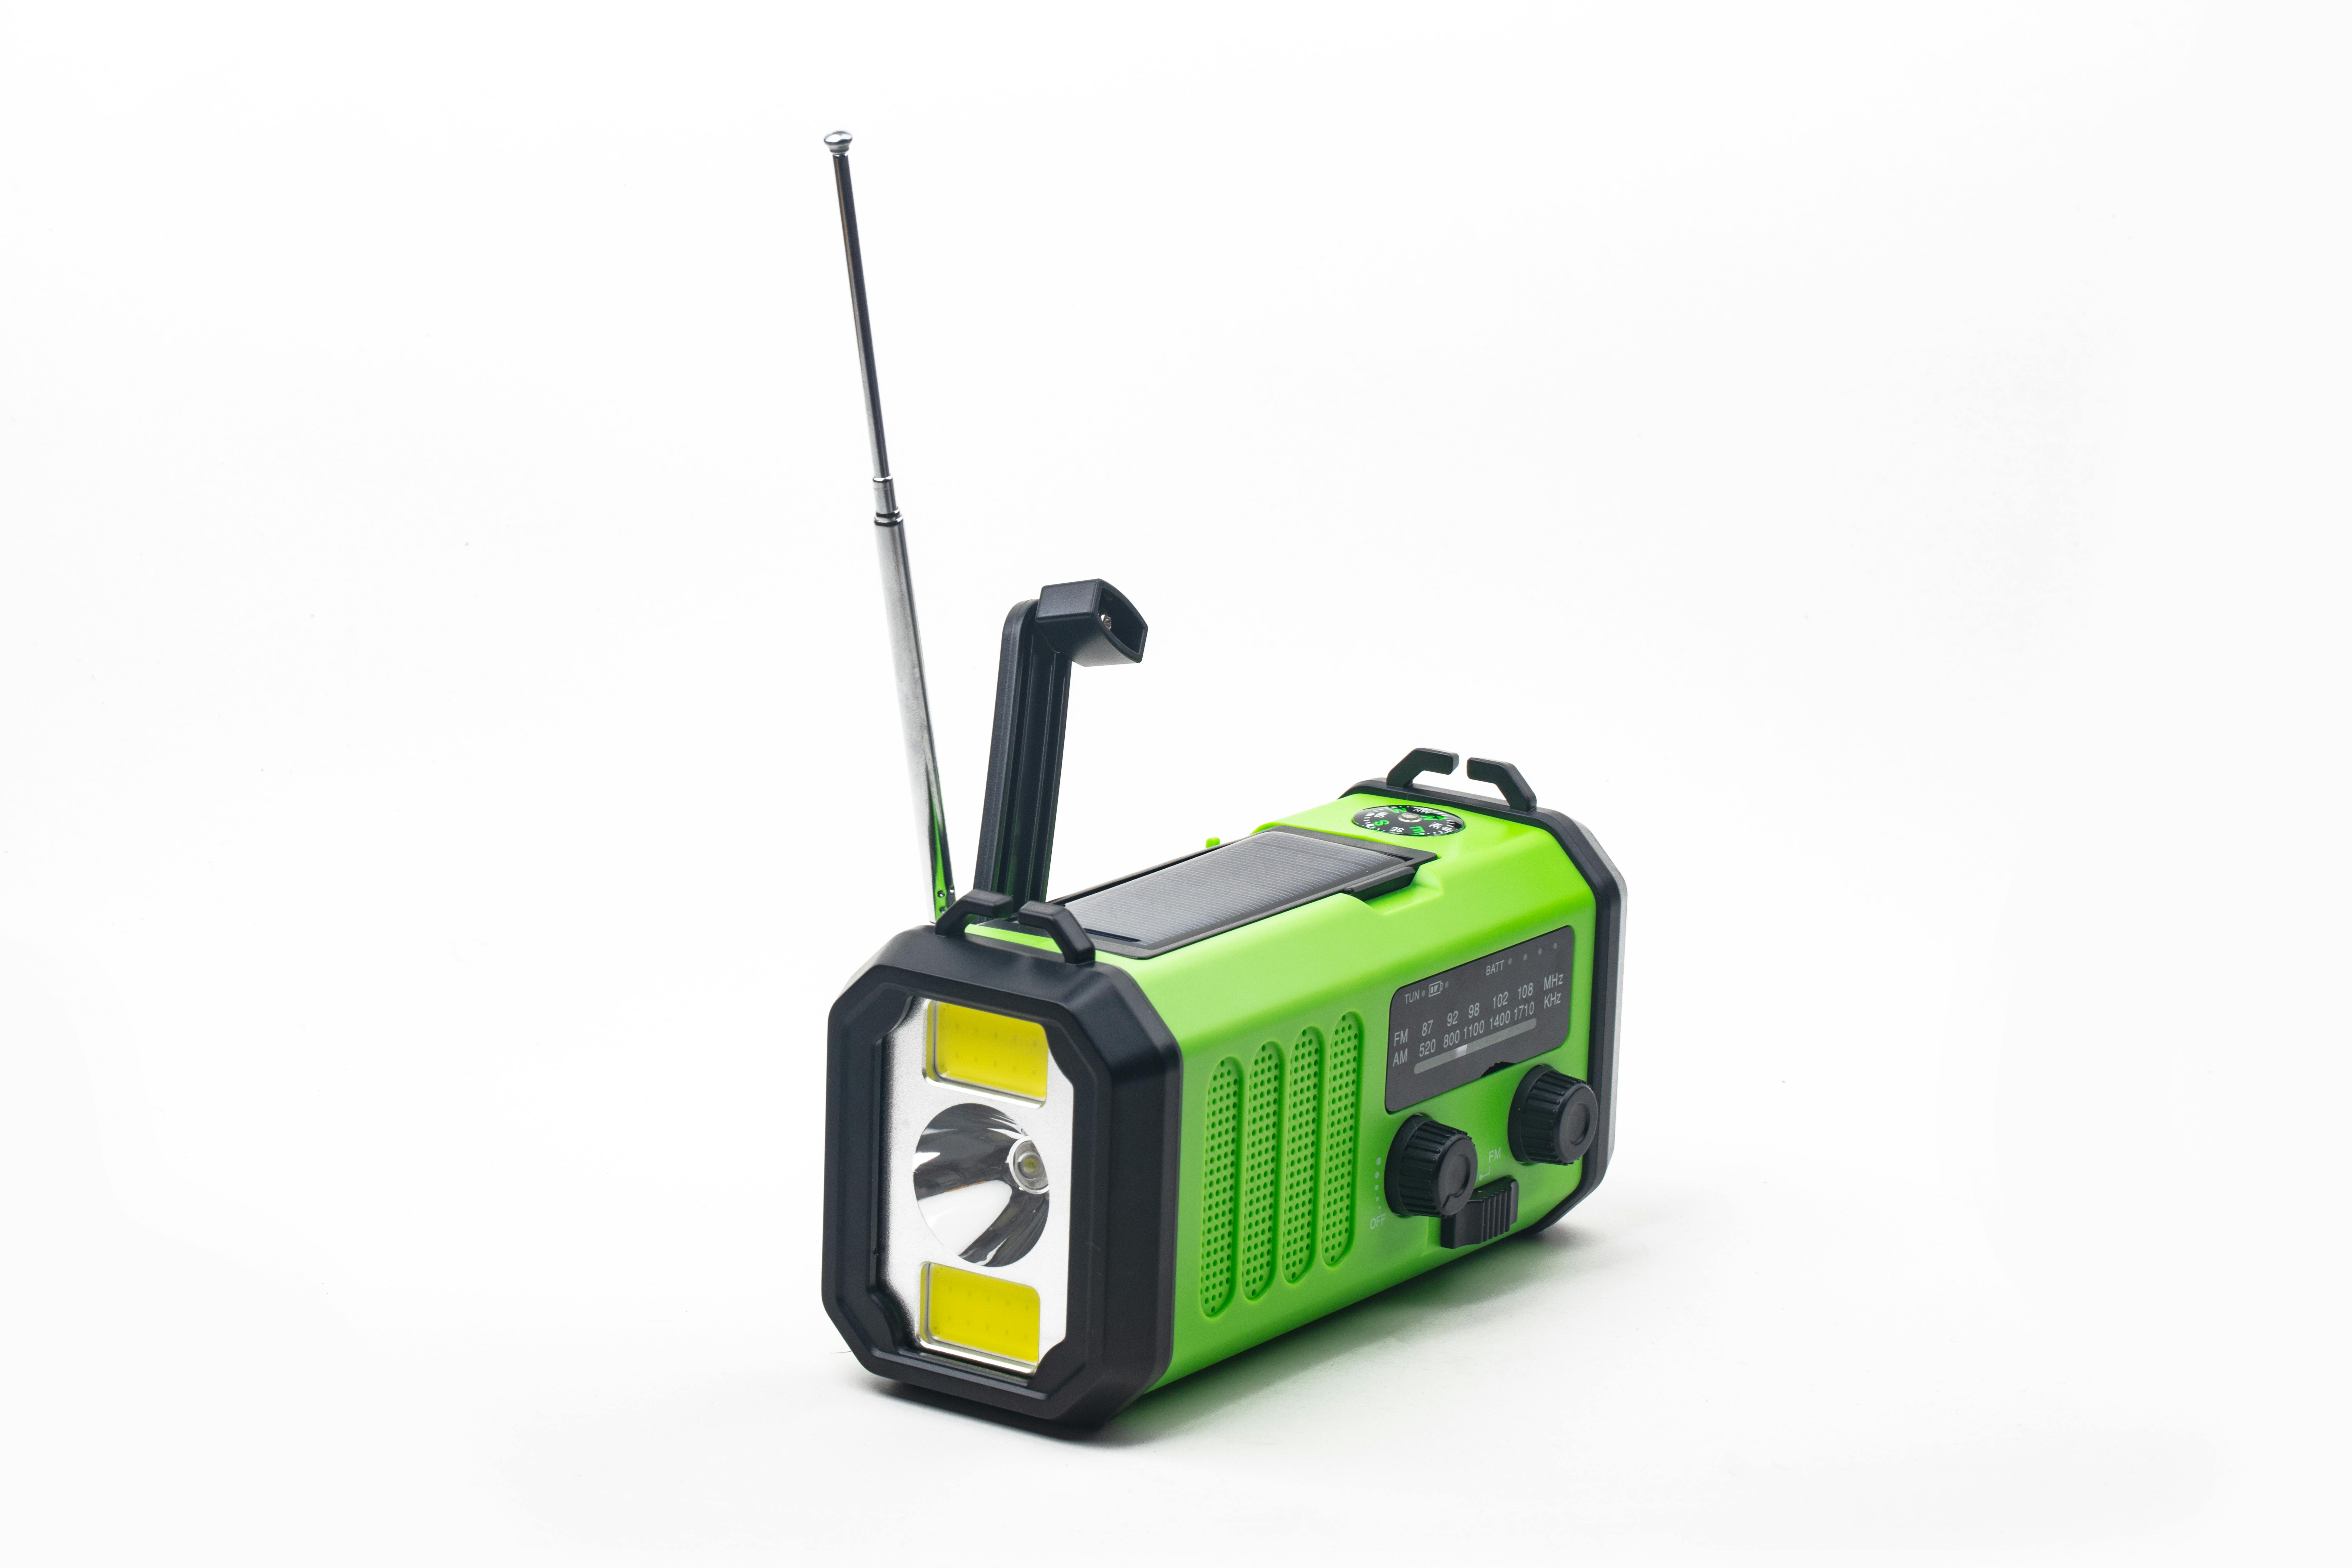 Emergency radio with flashlight rechargeable using built-in hand crank or solar cell